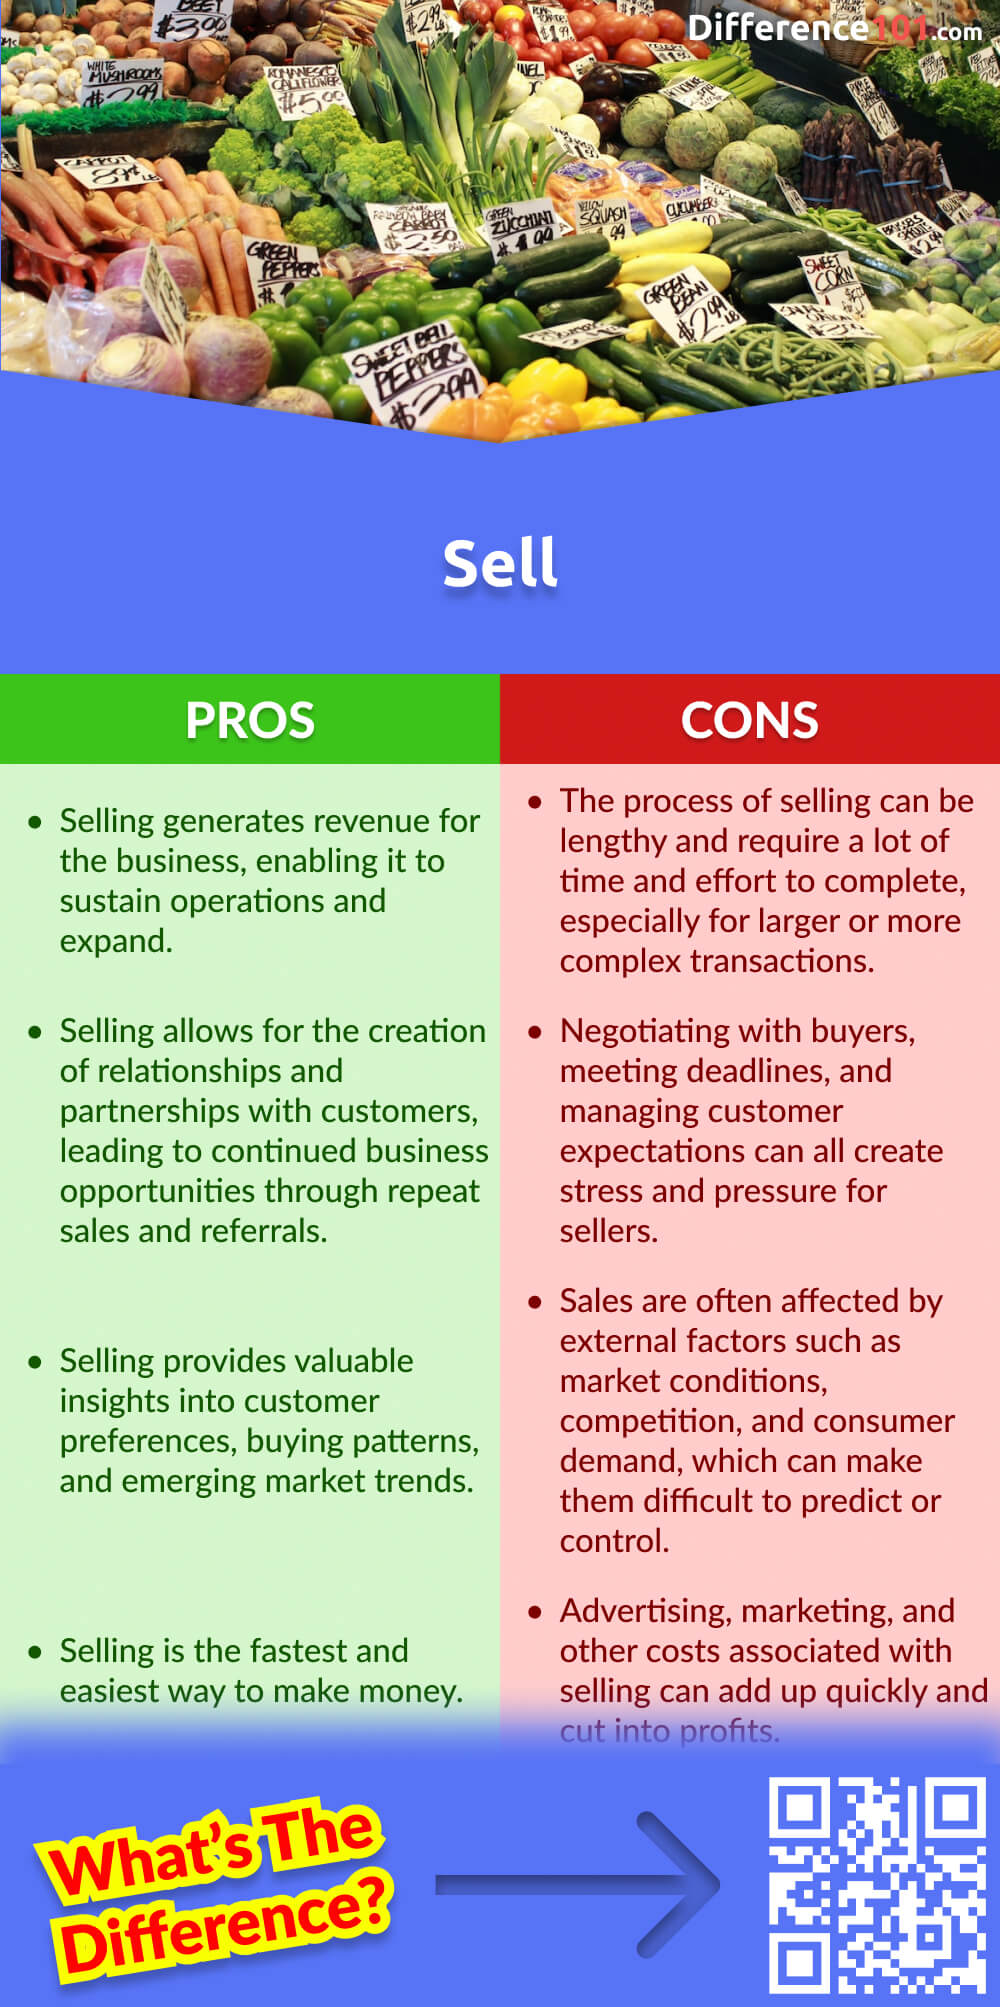 Sell Pros & Cons
